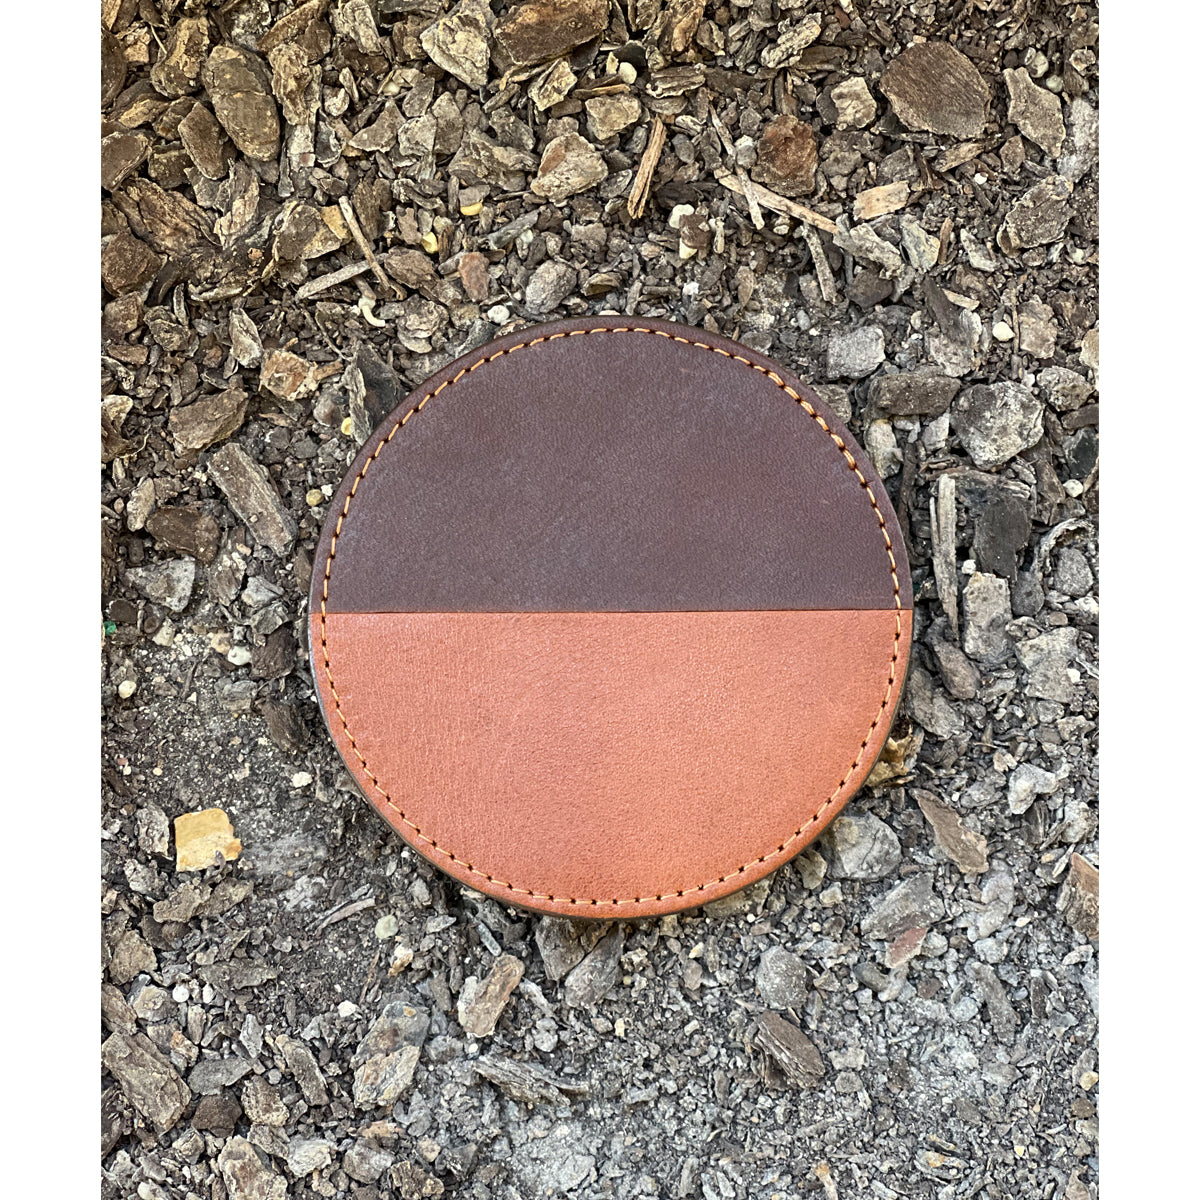 LIN8 upcycling leather at 928 at our Melbourne workshop. Leather table coasters. Sustainable practice in recreating leather goods and accessories